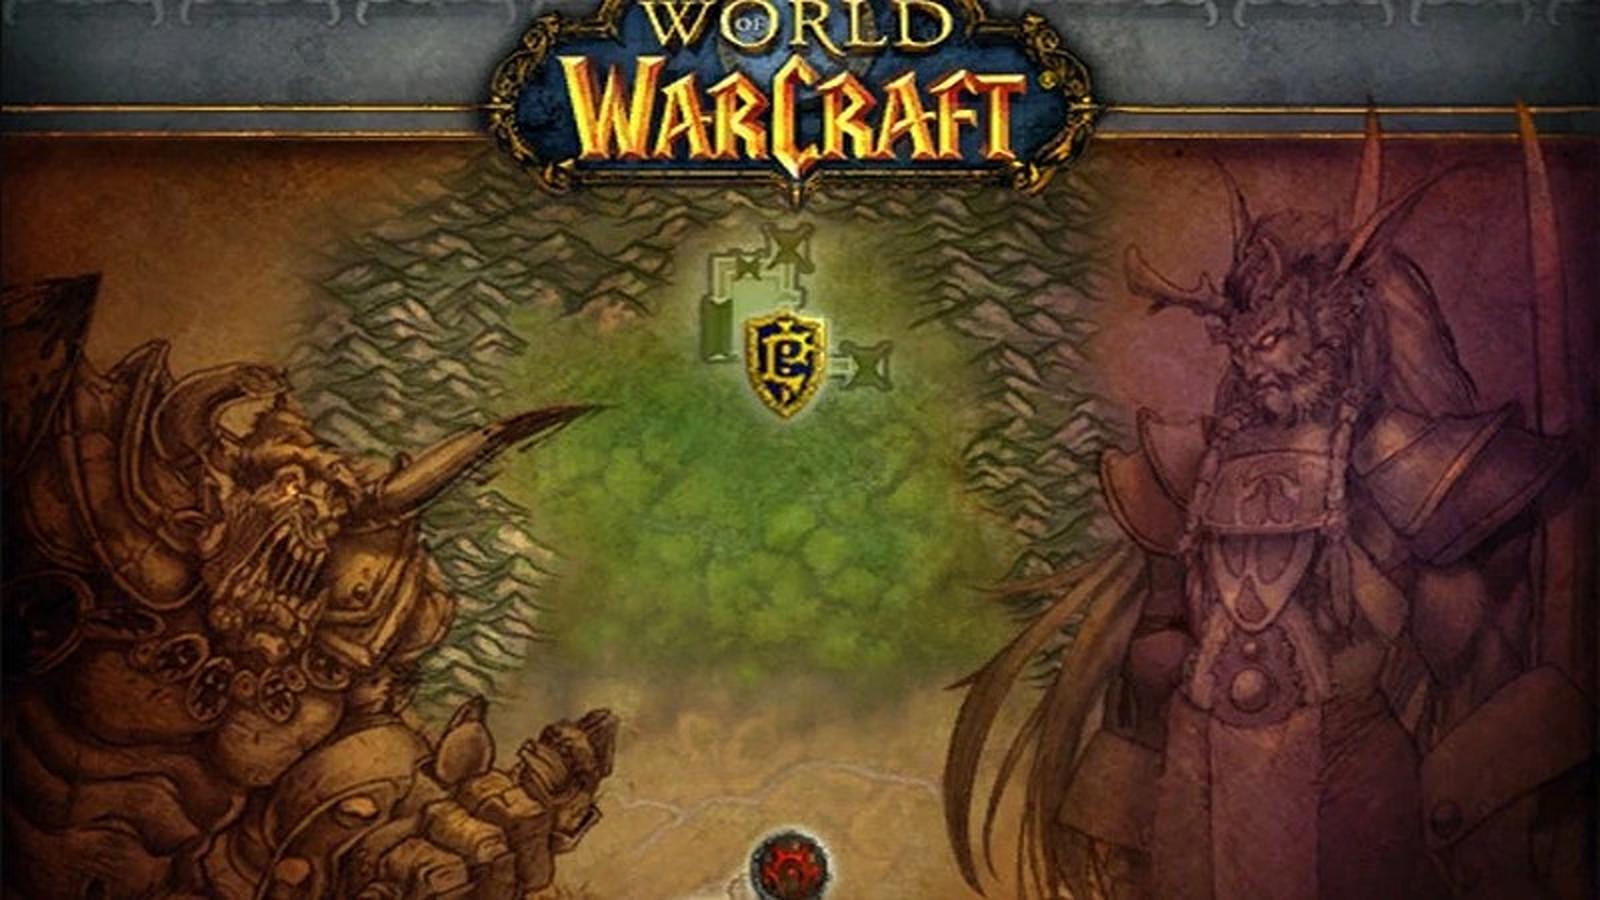 What is a good enough gaming CPU for World of Warcraft?